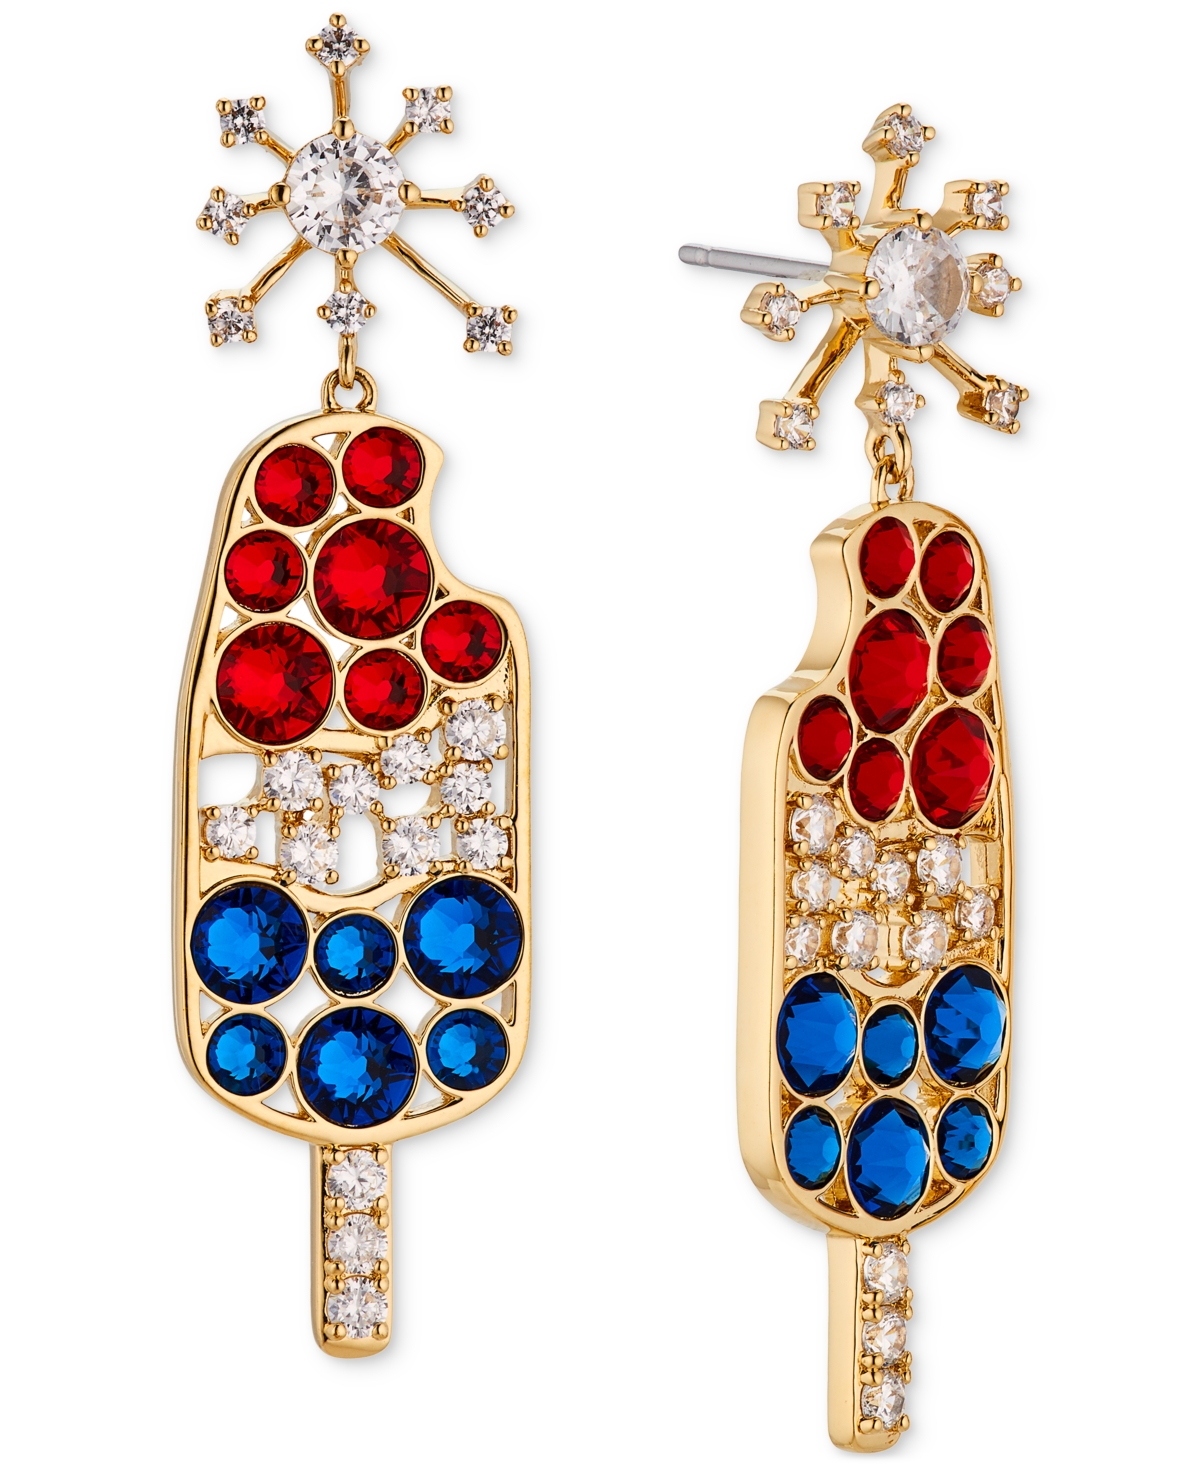 by Nadri 18k Gold-Plated Pave & Color Crystal Ice Bomb Pop Drop Earrings - Gold